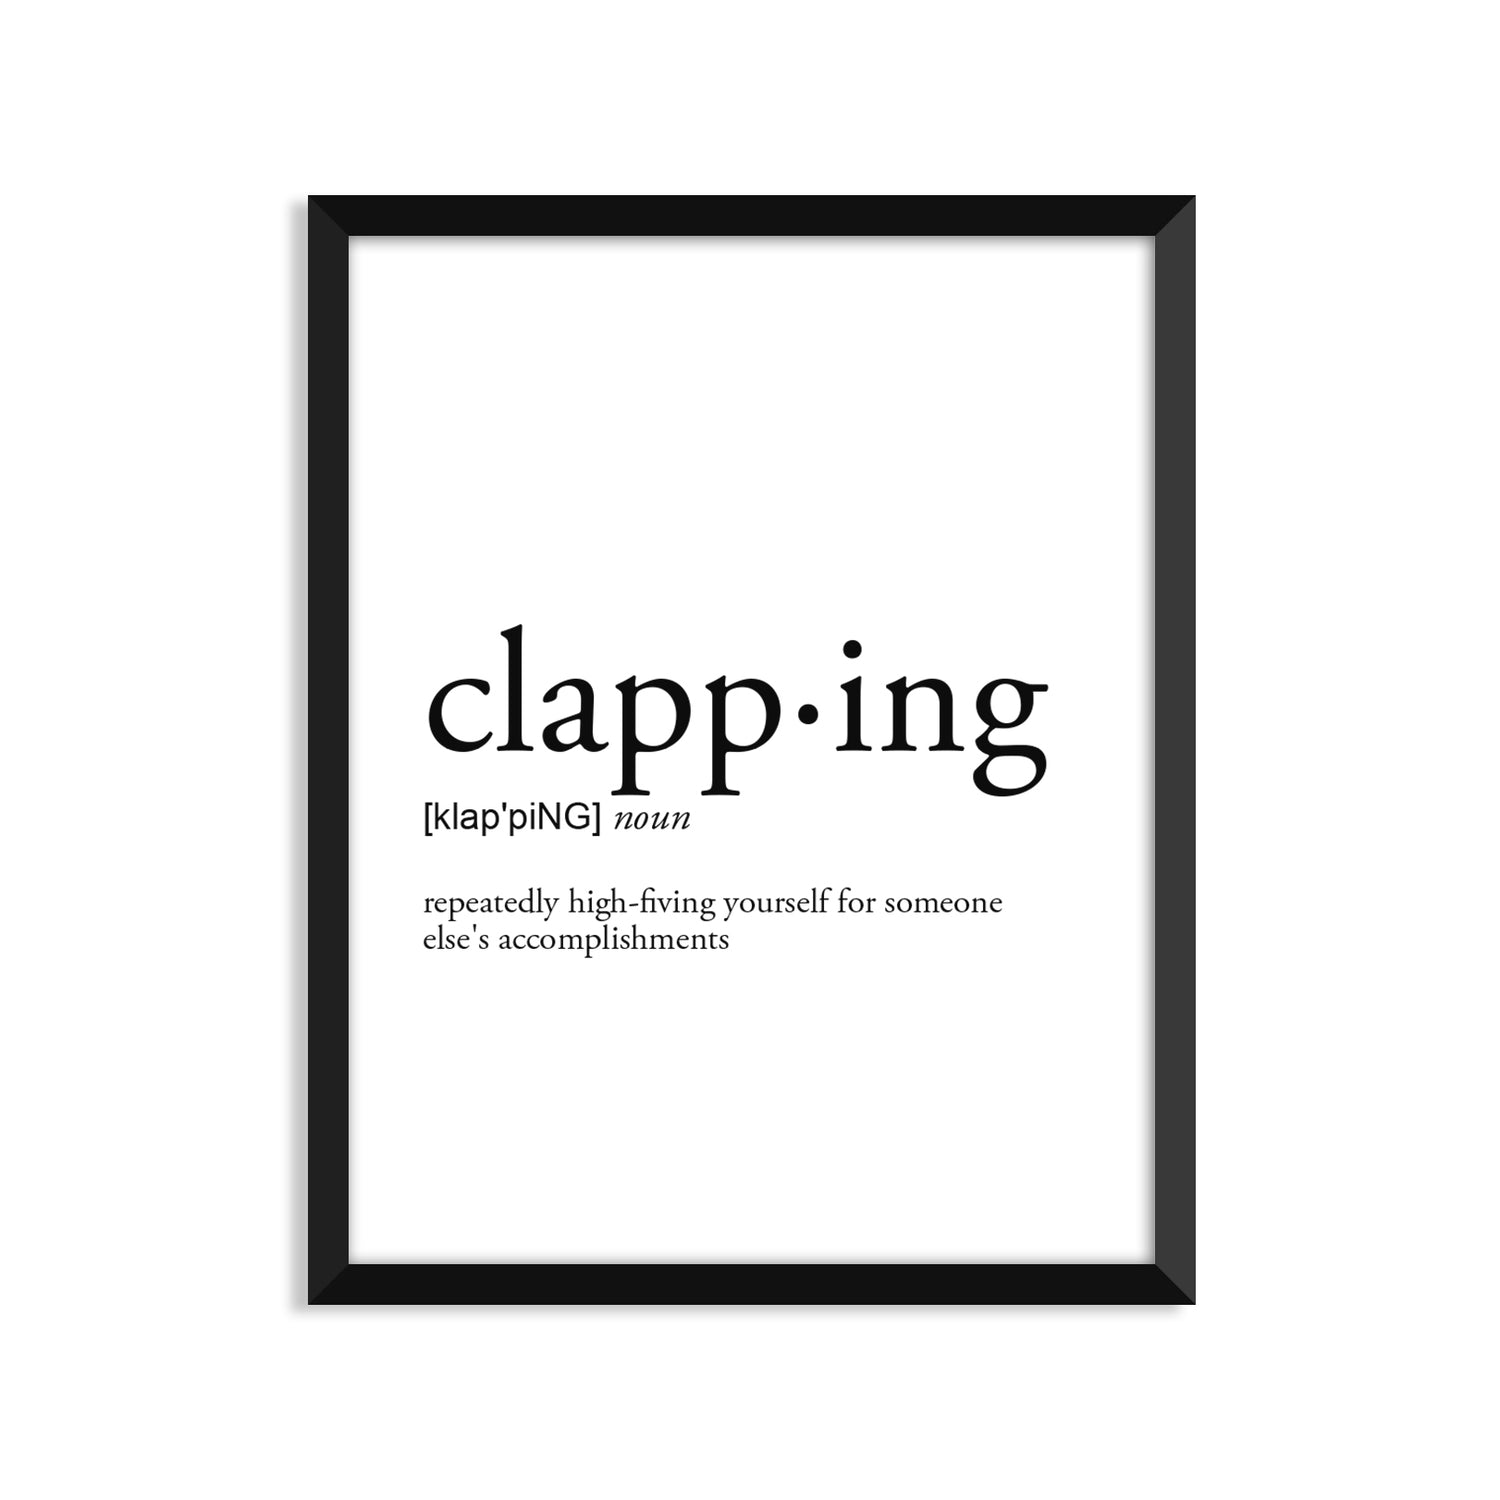 Clapping Definition - Unframed Art Print Or Greeting Card